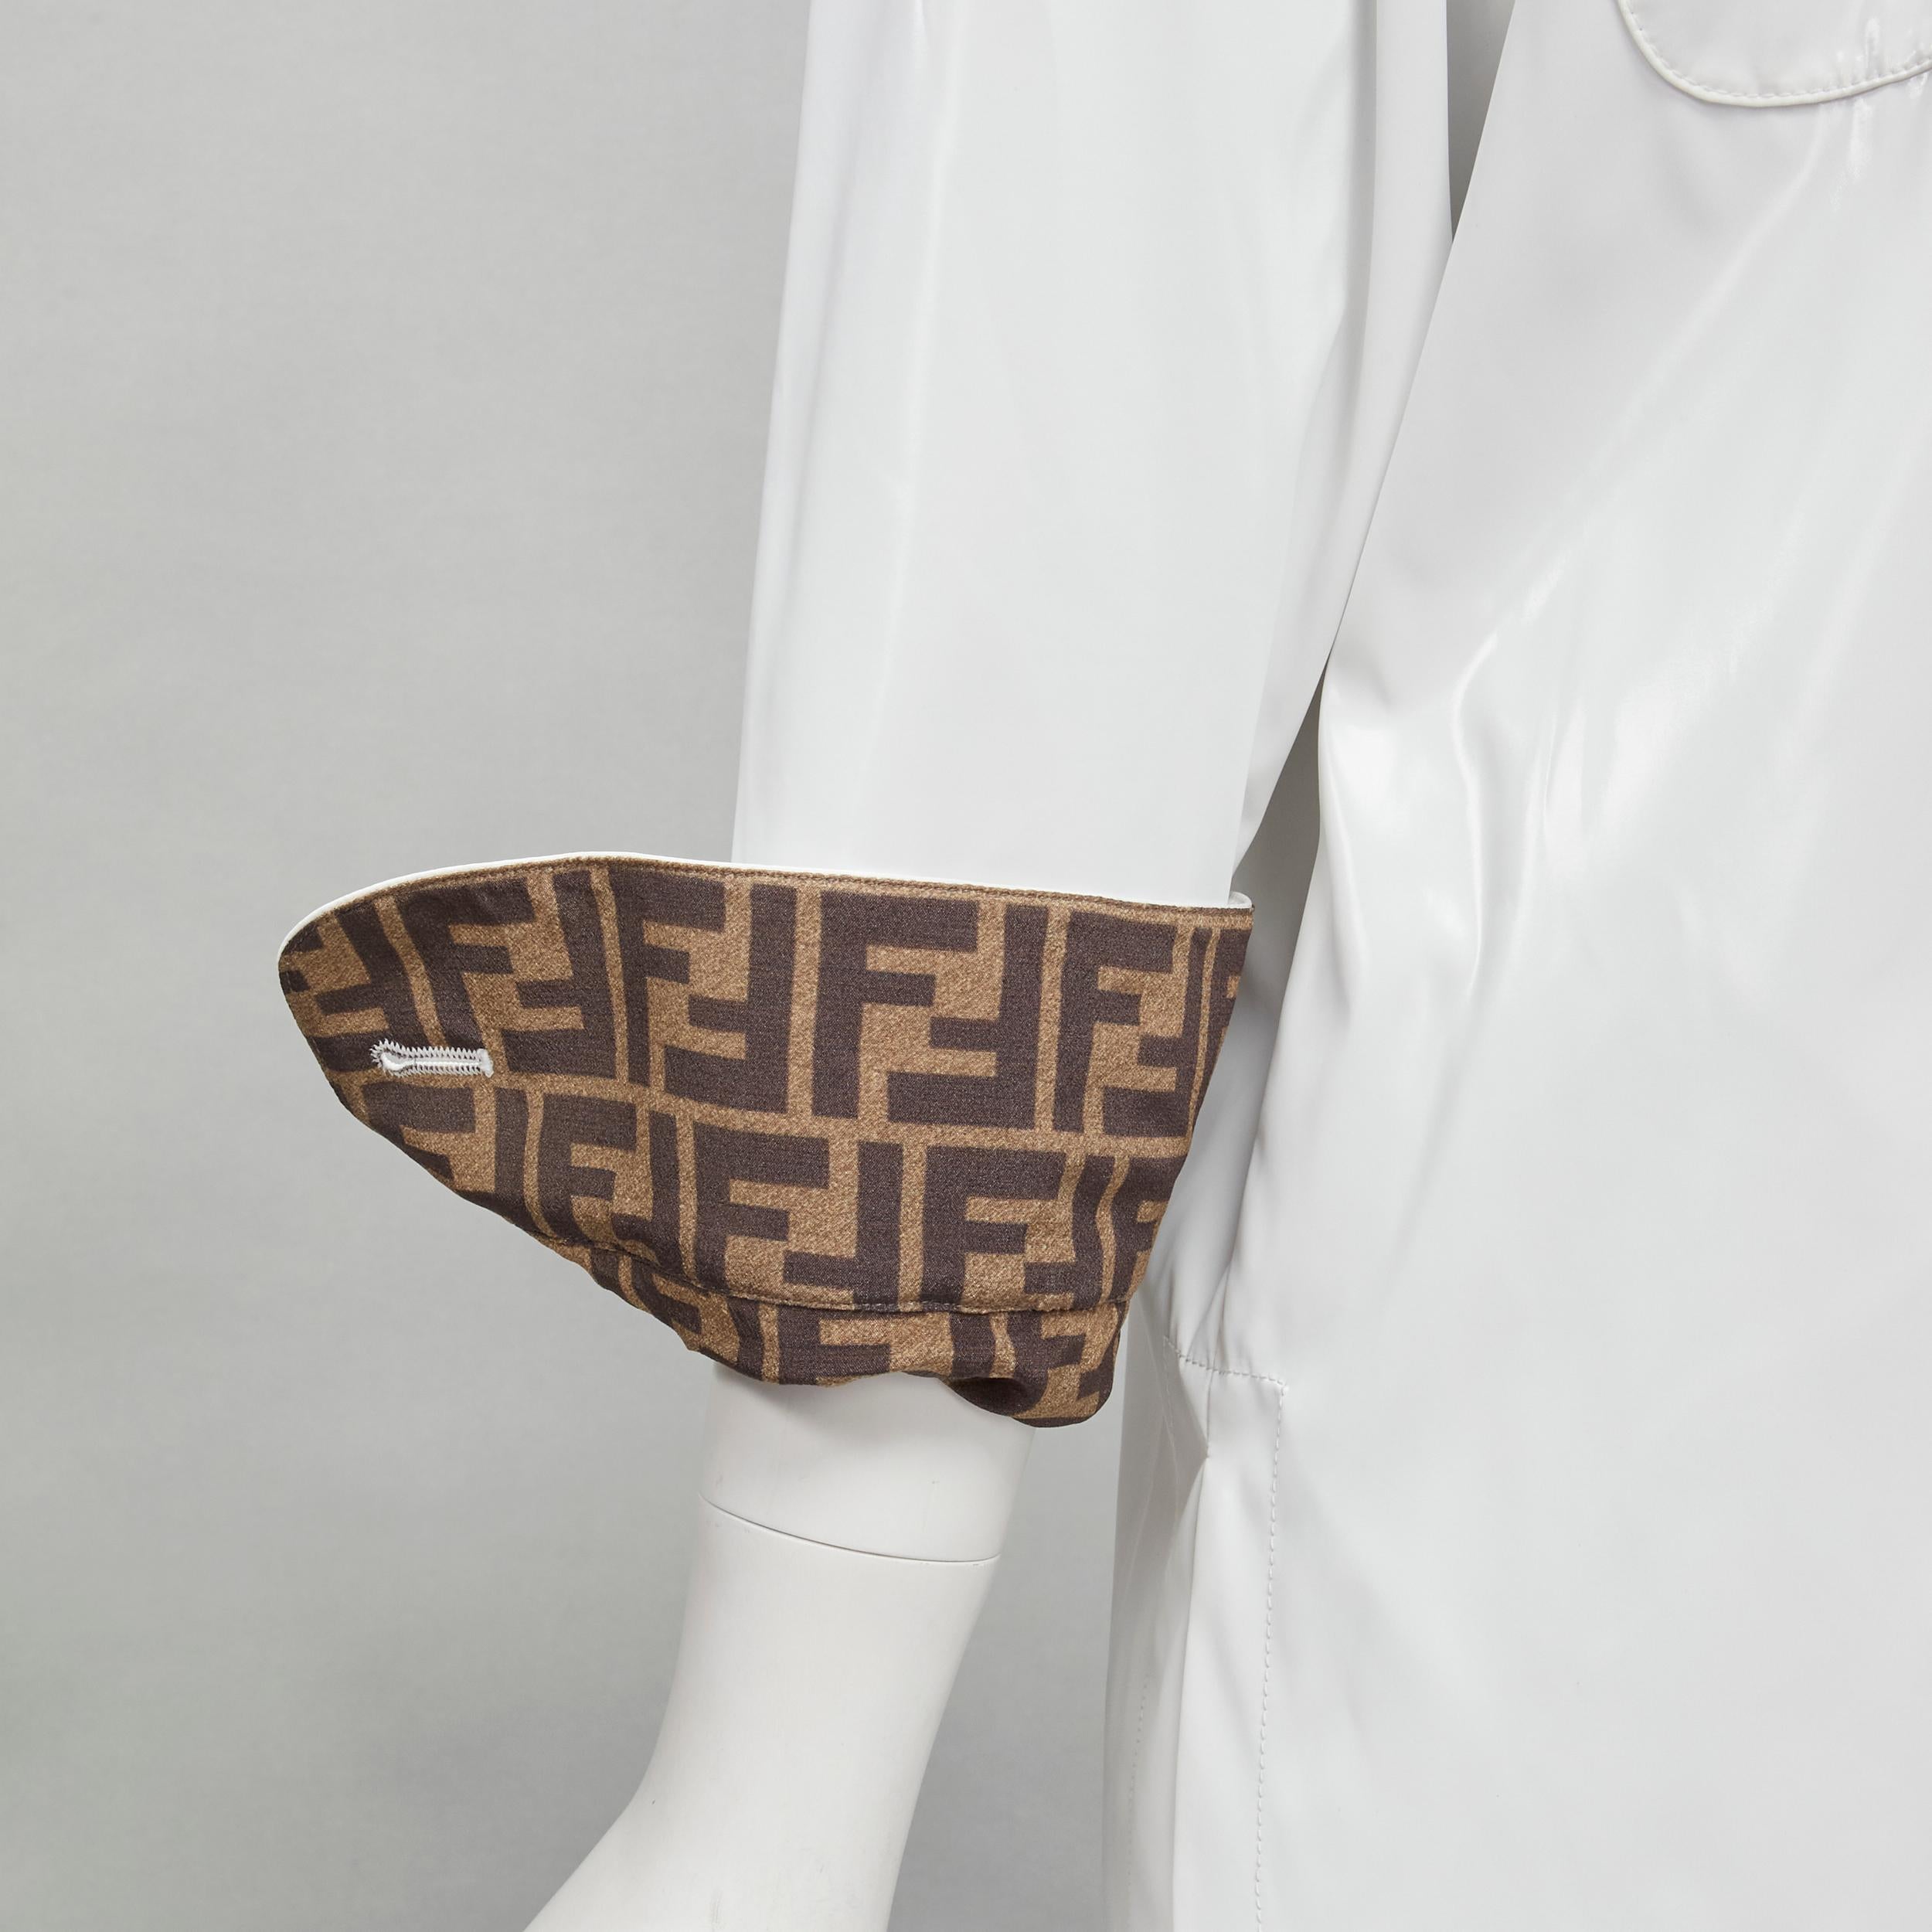 FENDI white polyester brown FF Zucca monogram lined overshirt jacket IT36 XS
Brand: Fendi
Extra Detail: Shiny polyester outer with FF Zucca lining. Curved front hem. Large tortoise resin button. Dual patch breast pocket.

CONDITION:
Condition: Very